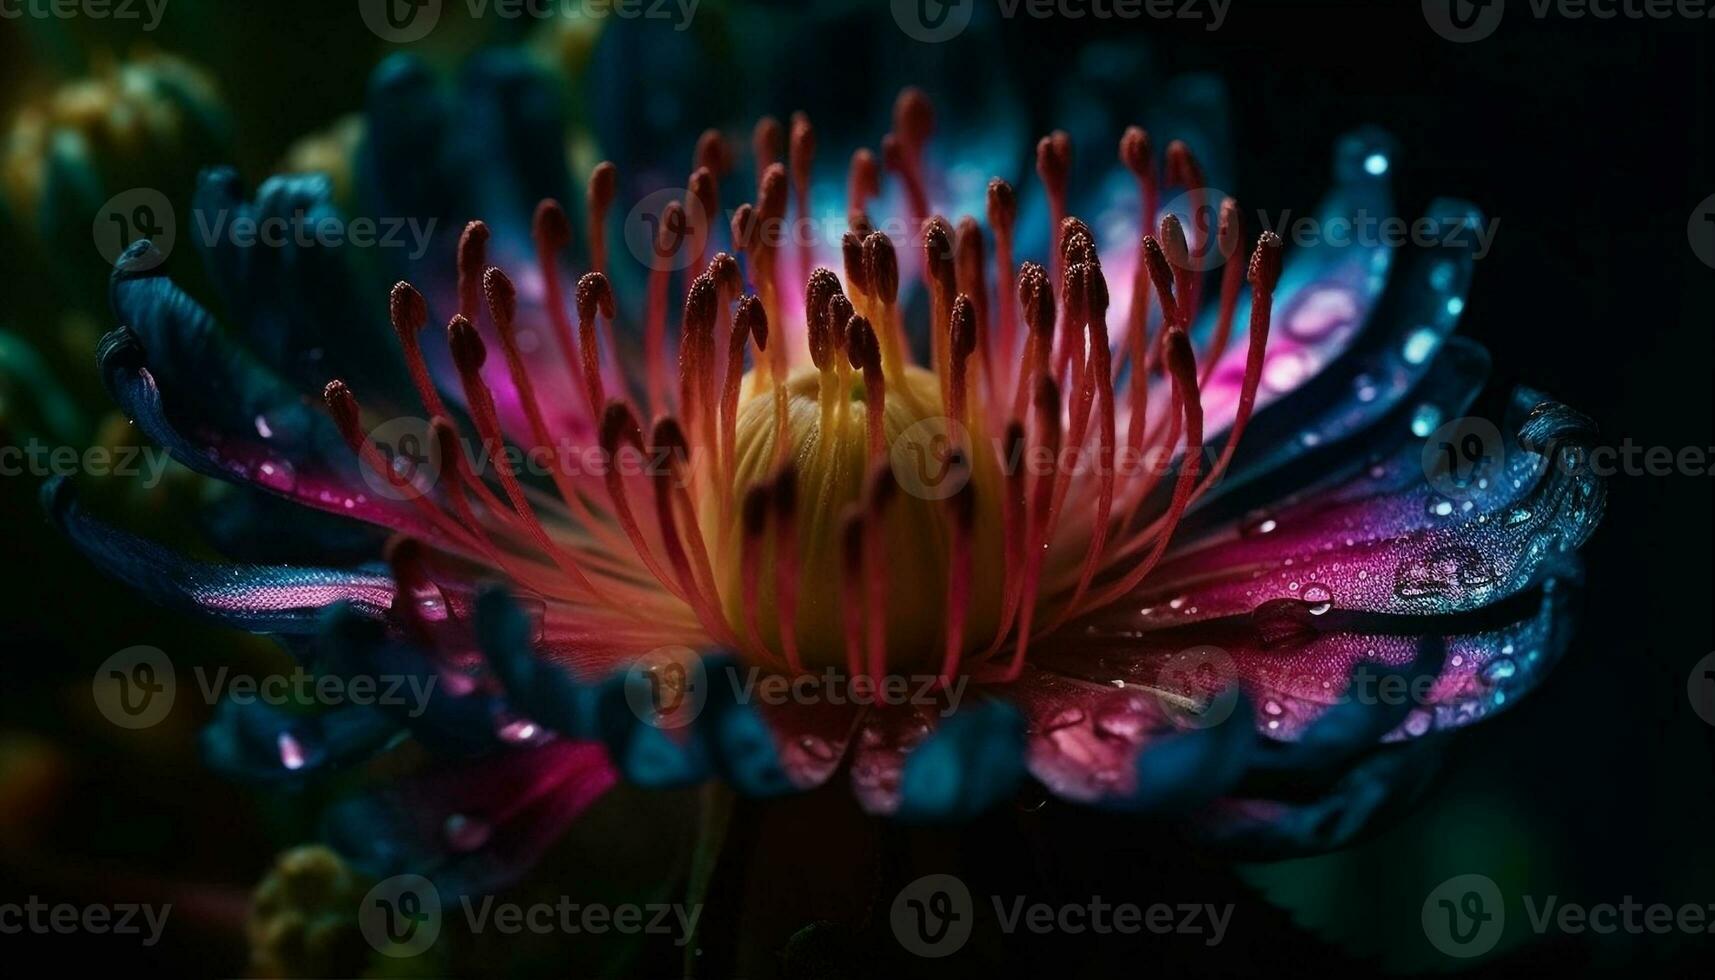 Vibrant gerbera daisy in aquatic pond growth generated by AI photo